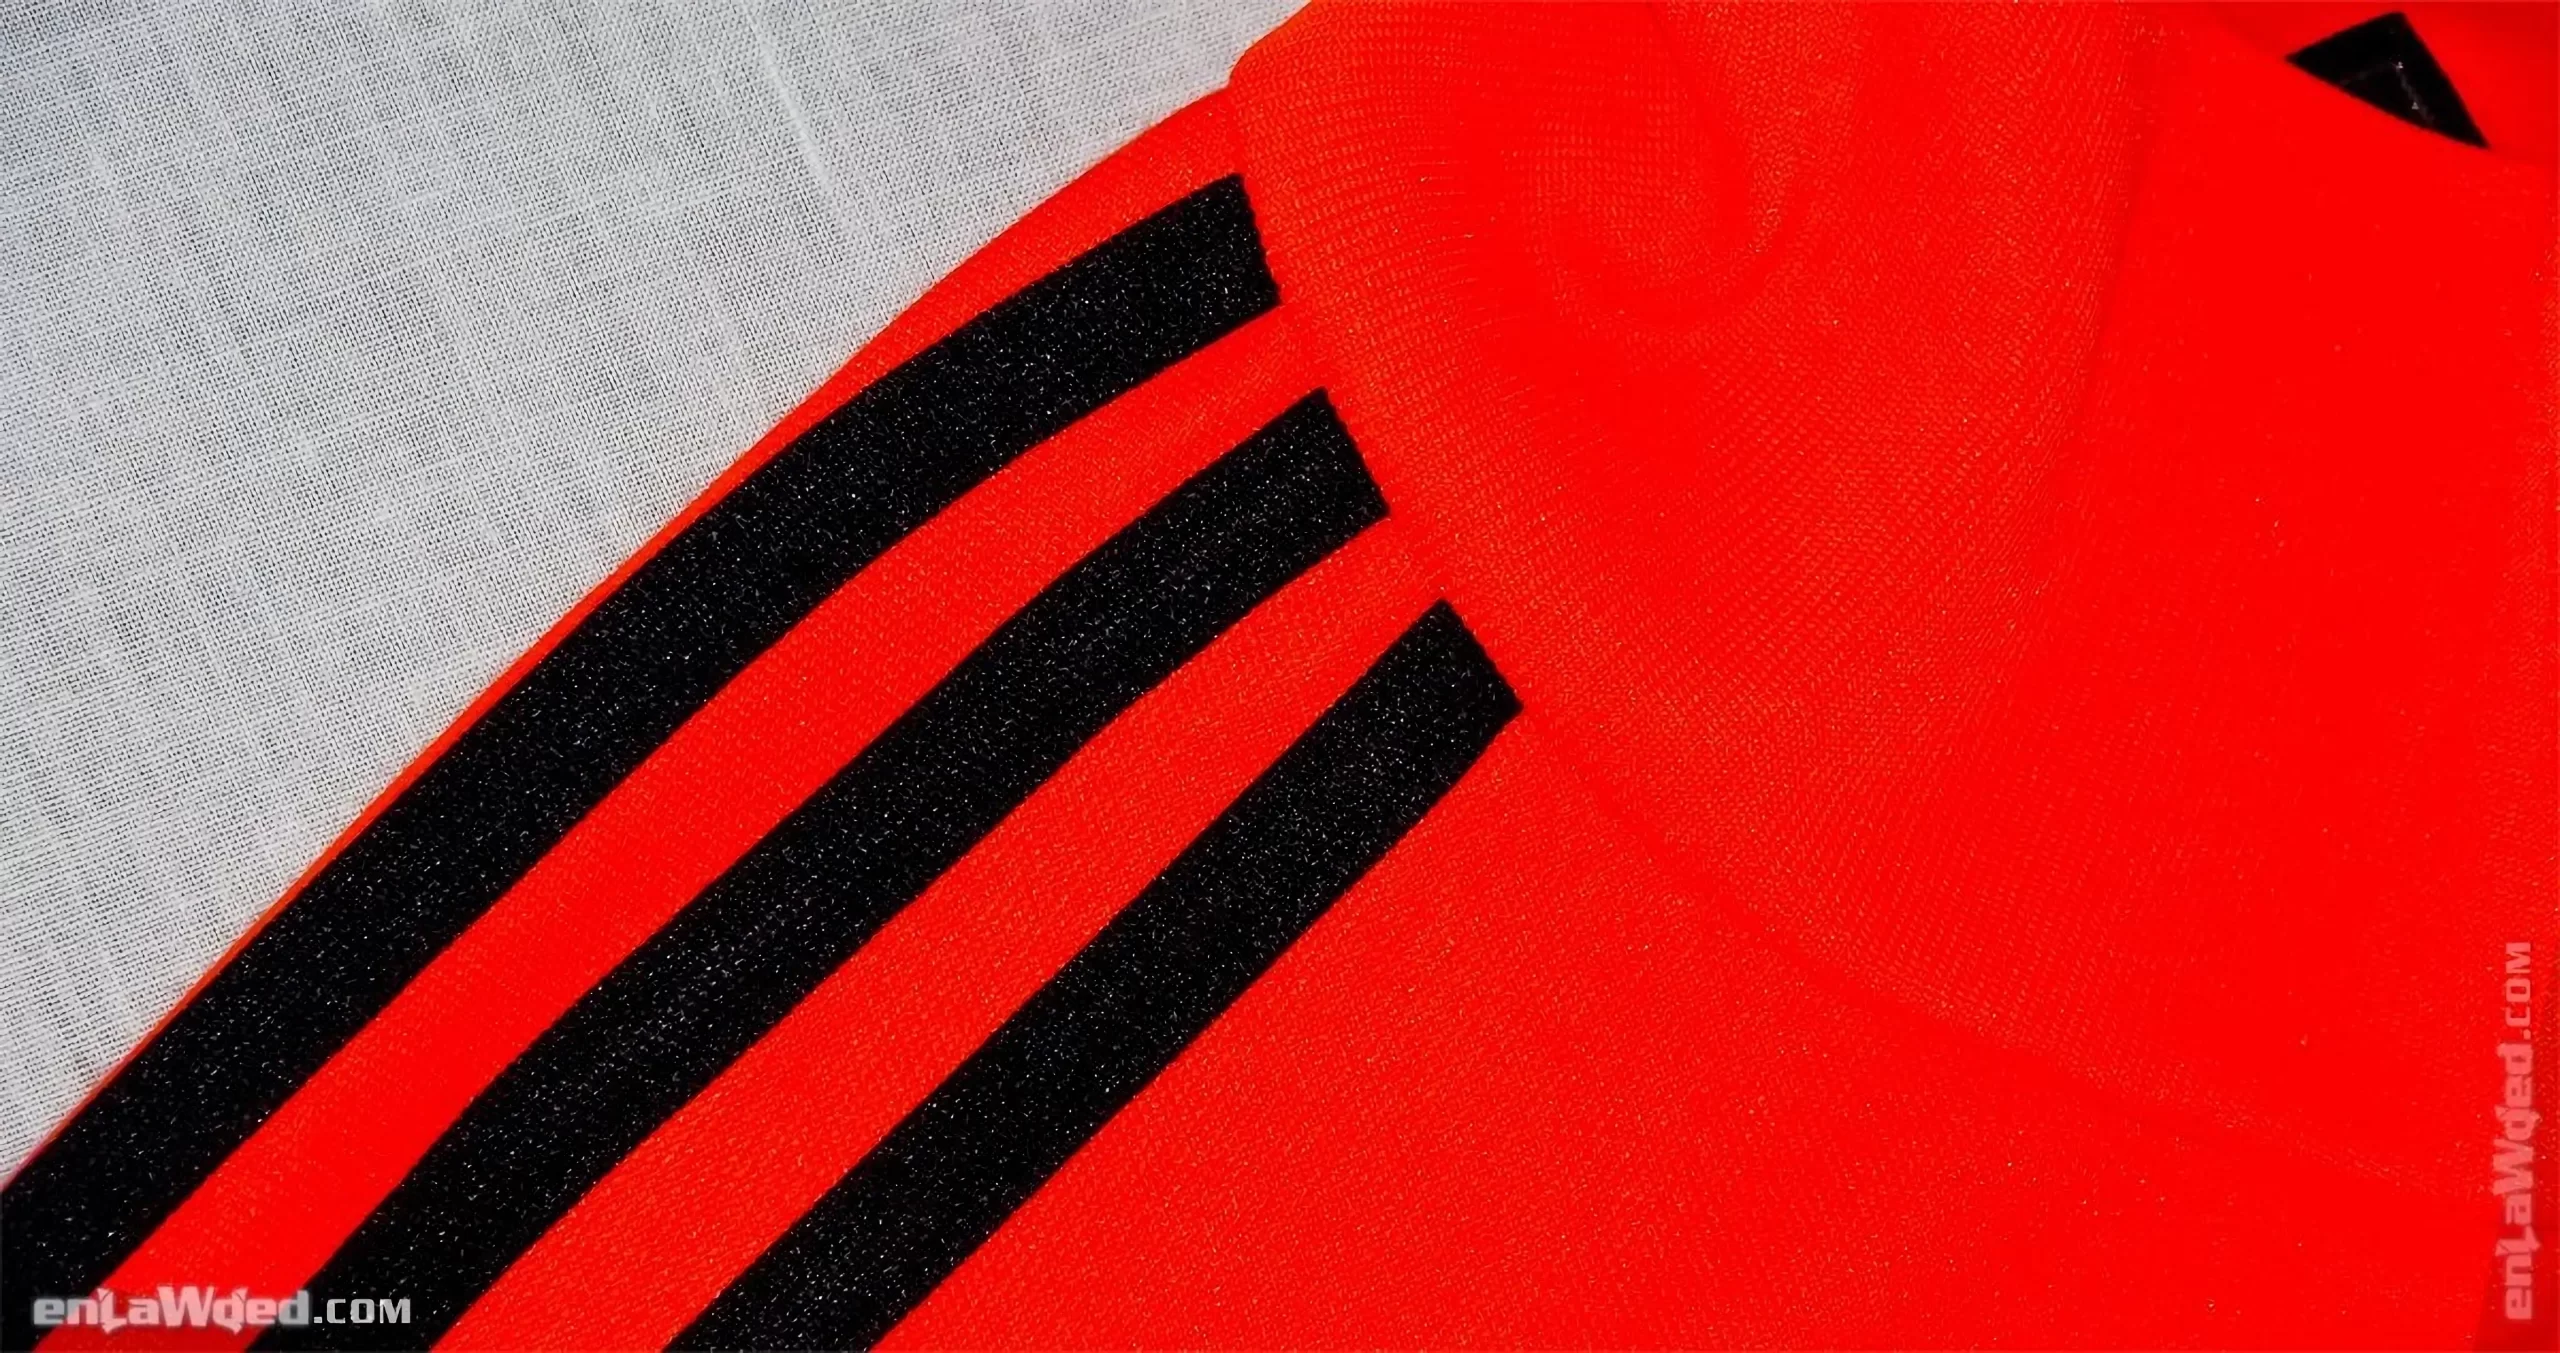 12th interior view of the Adidas Originals Netherlands 1974 Track Top